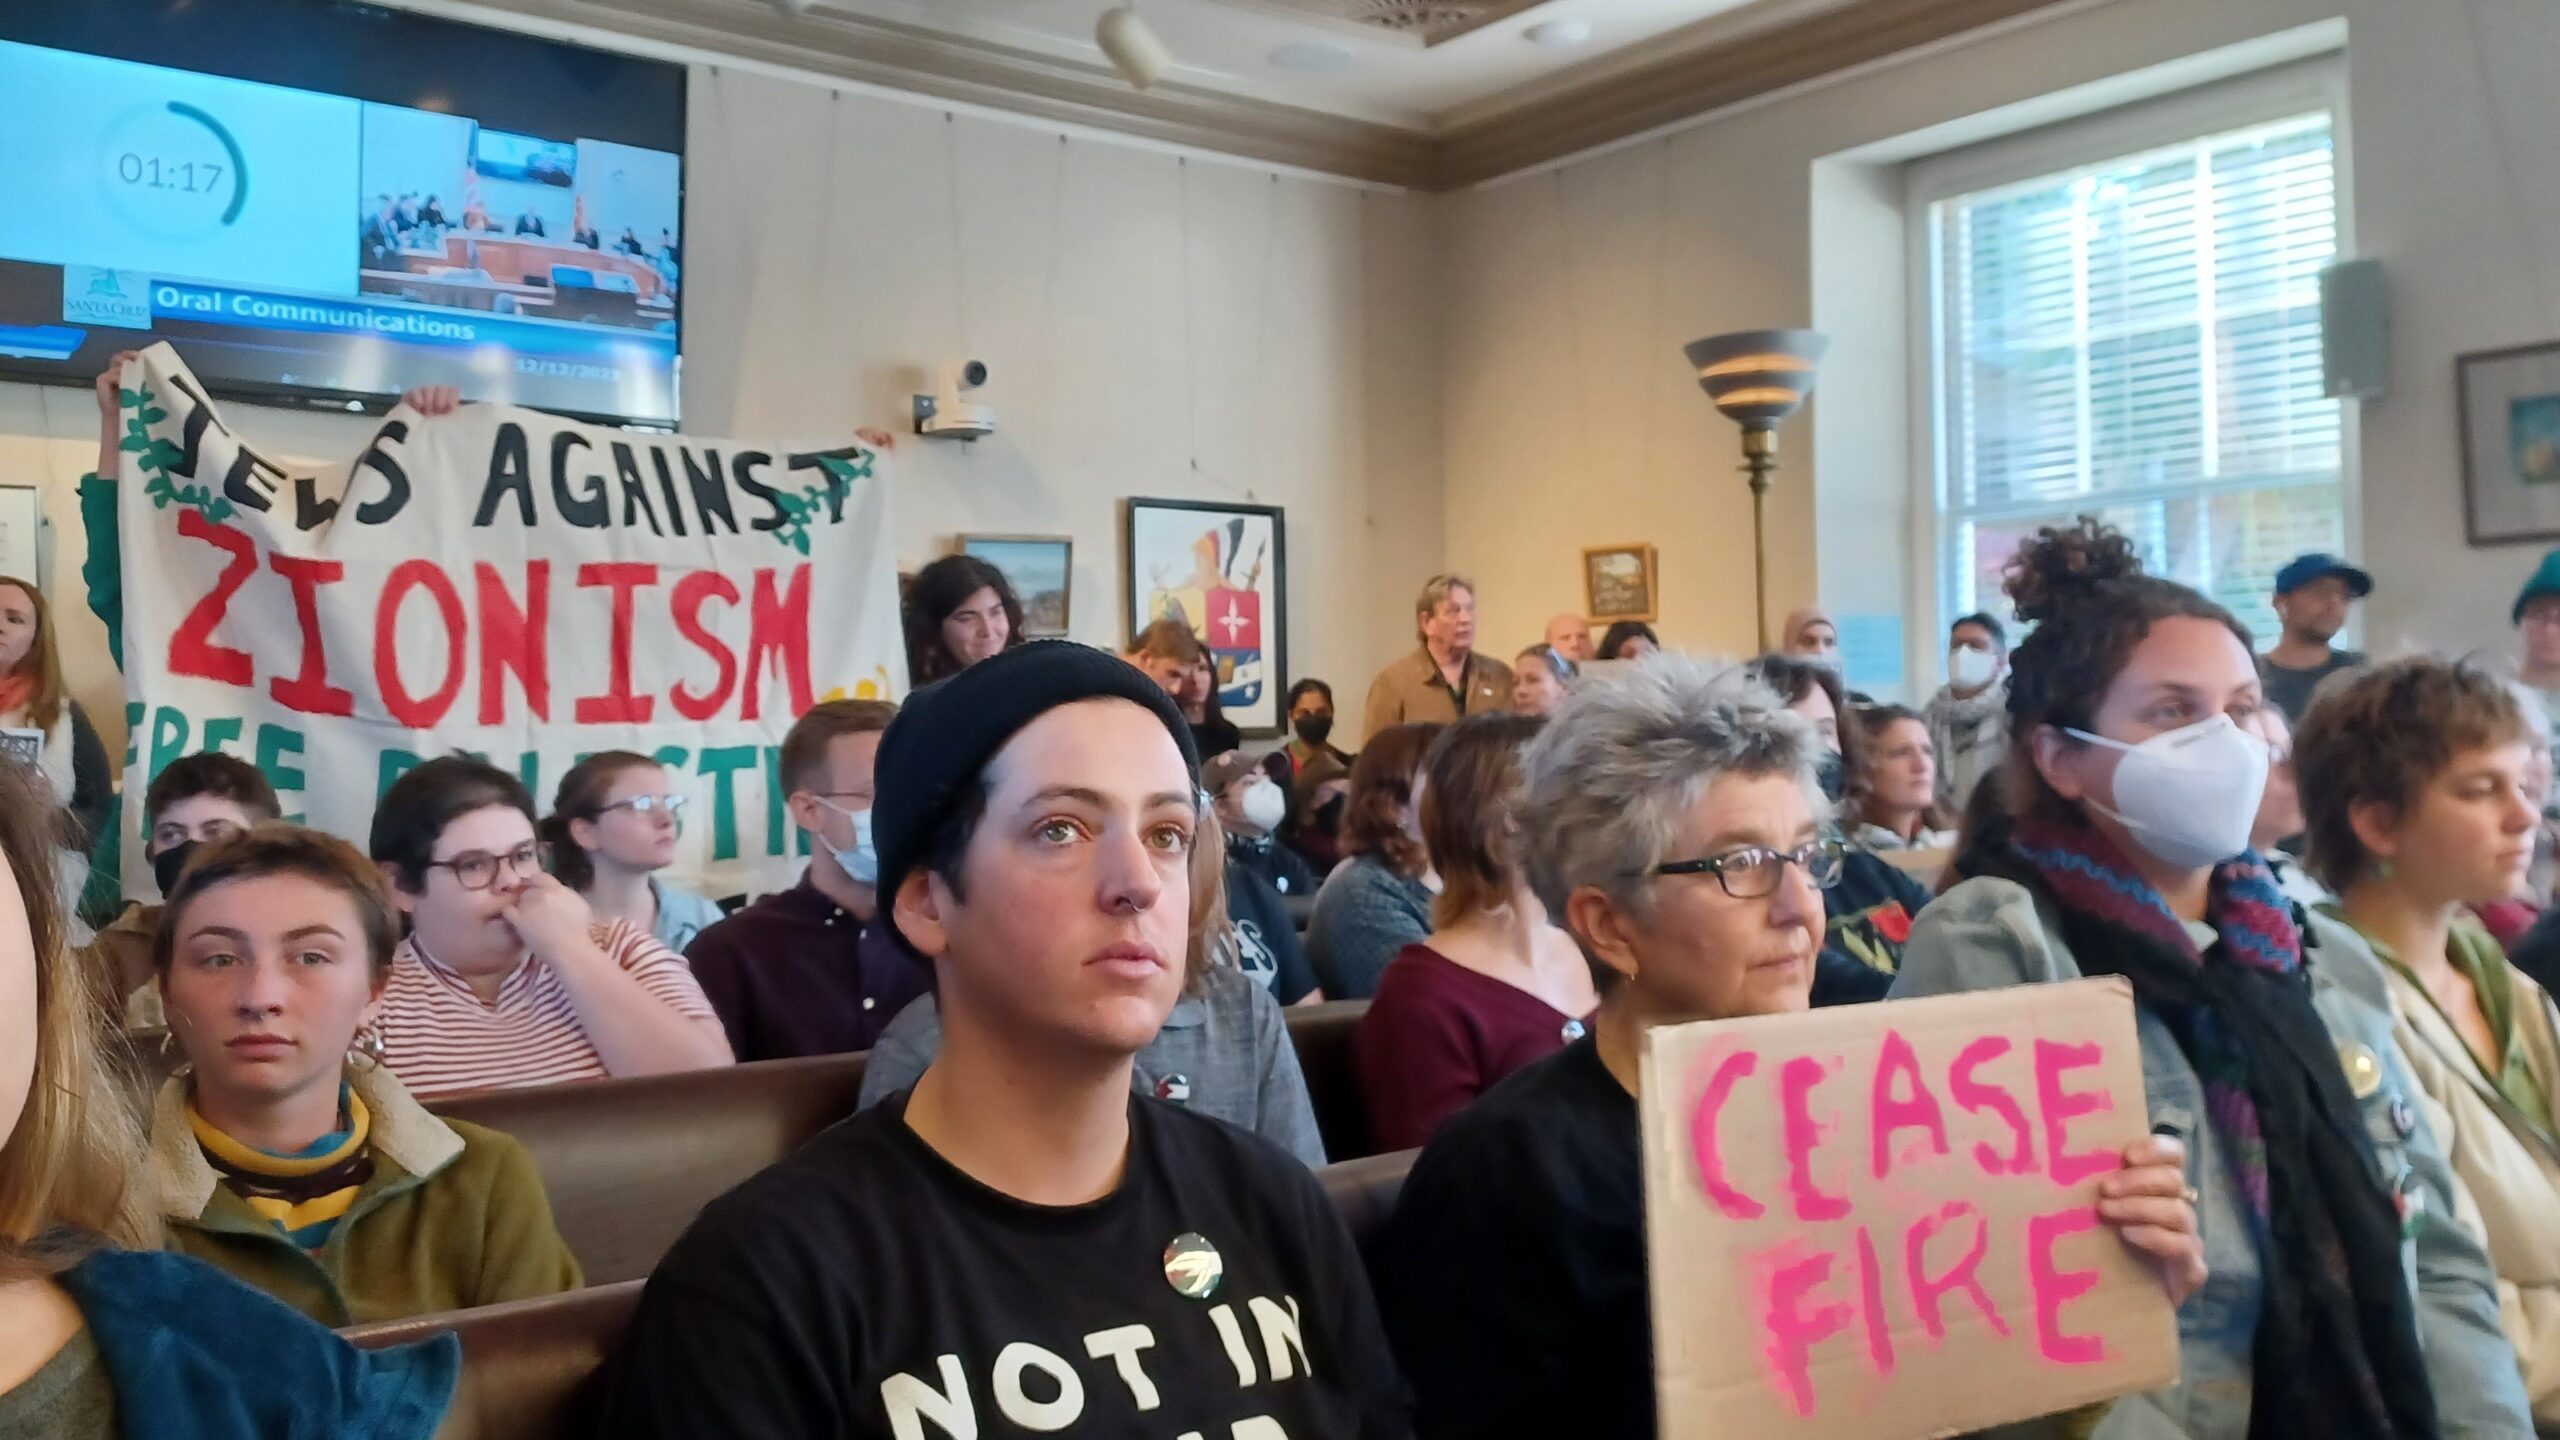 Residents sit in the Santa Cruz City Council chambers on Dec. 12 holding signs reading "Ceasefire" and "Jews against Zionism."